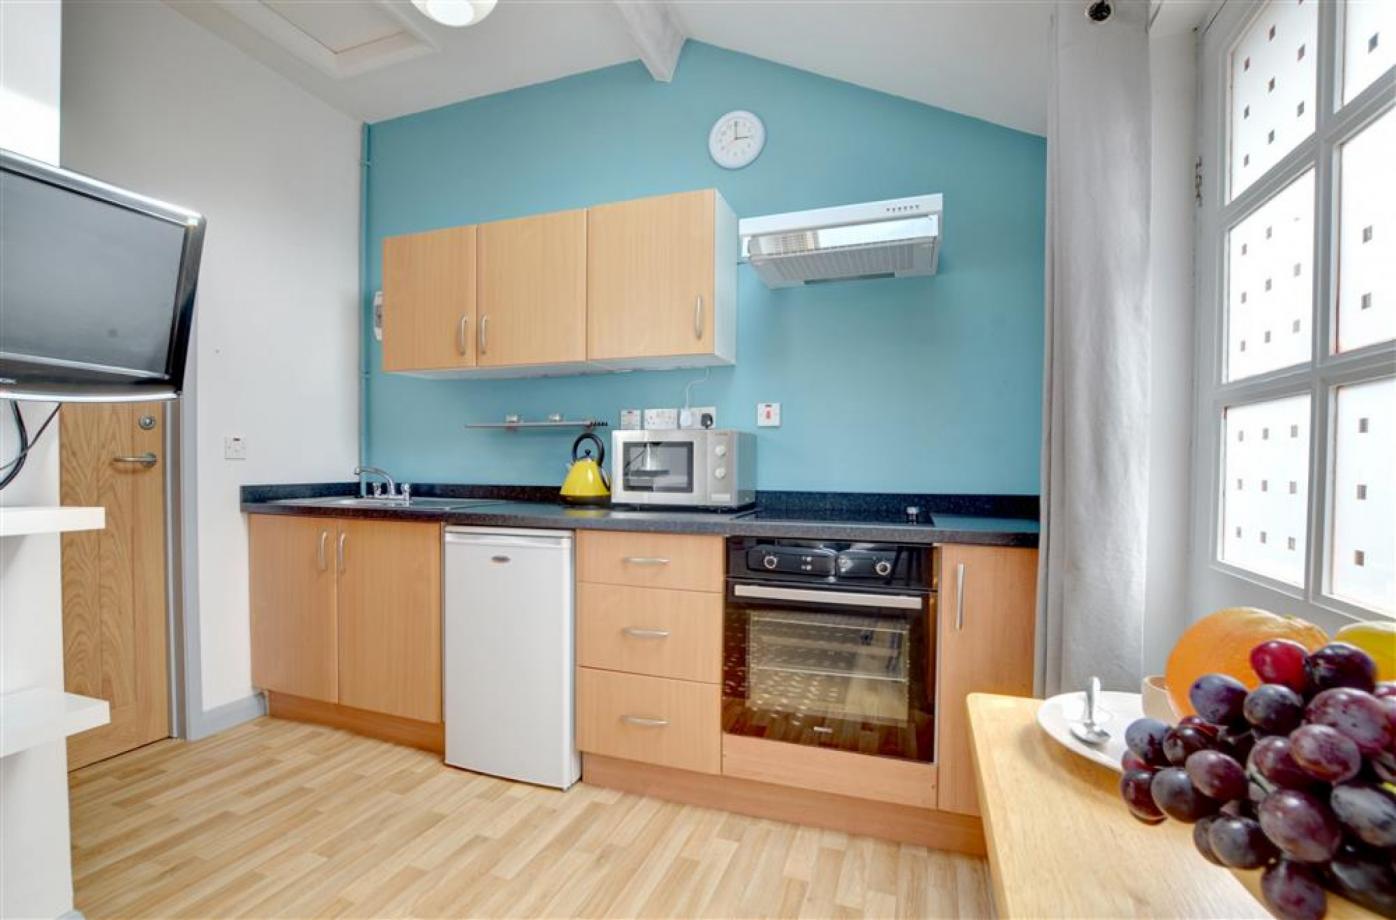 The fully equipped kitchen in one of the Cranbrook holiday lets, showing an oven, a microwave, a fridge a sink and cupboards for accomodation in Kent..